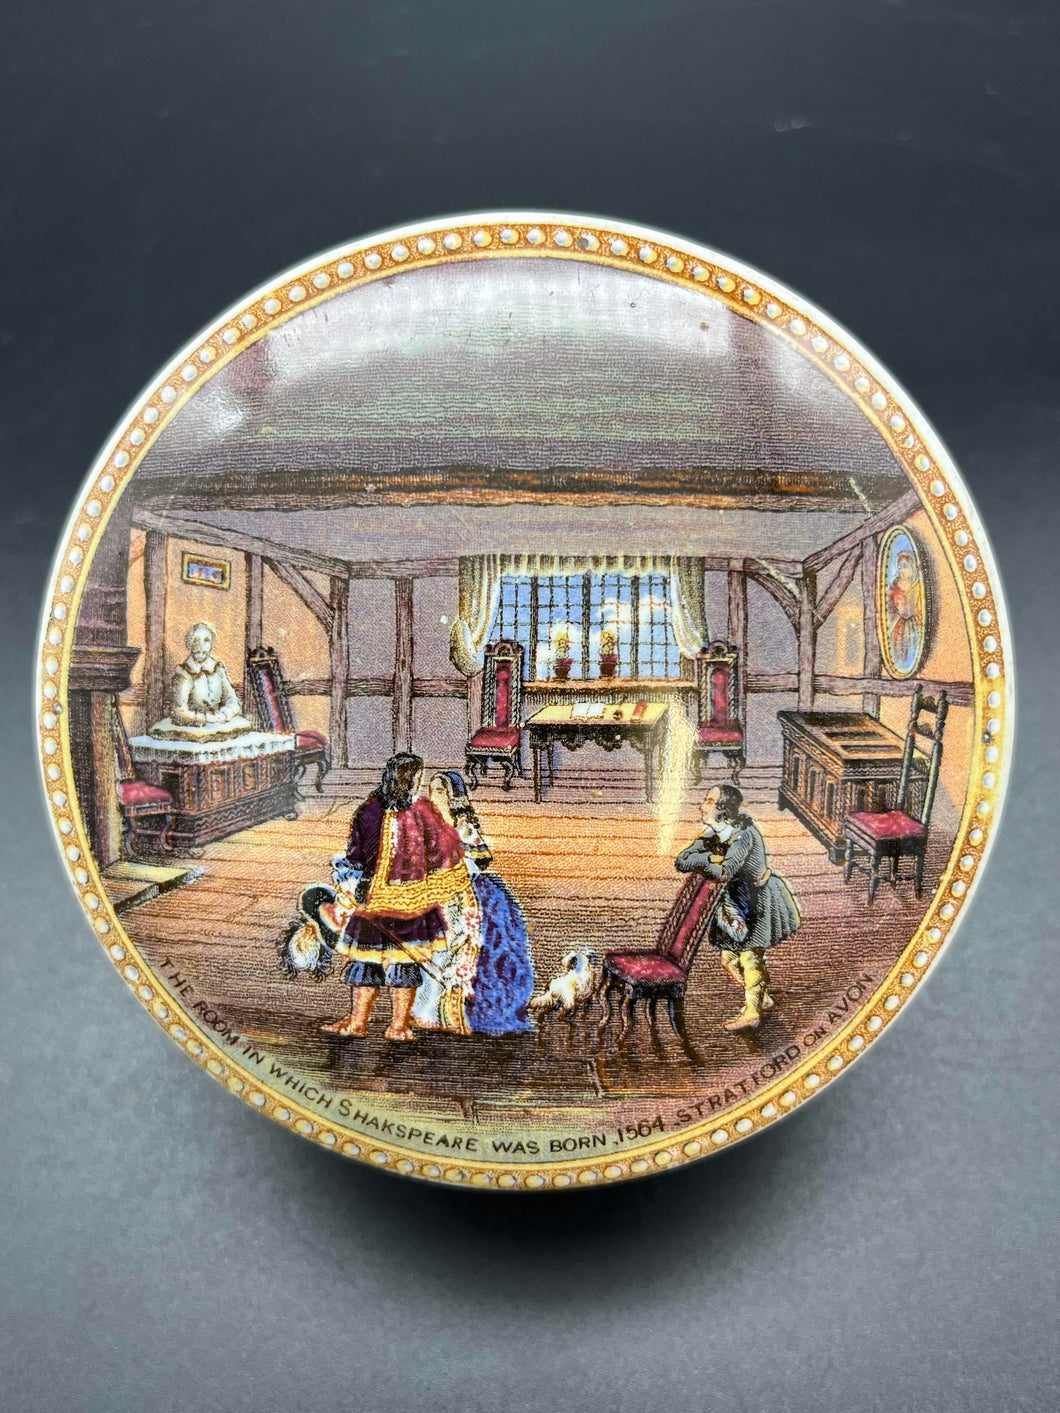 Prattware Printed Pot Lid & Base - The Room in Which Shakspeare was Born